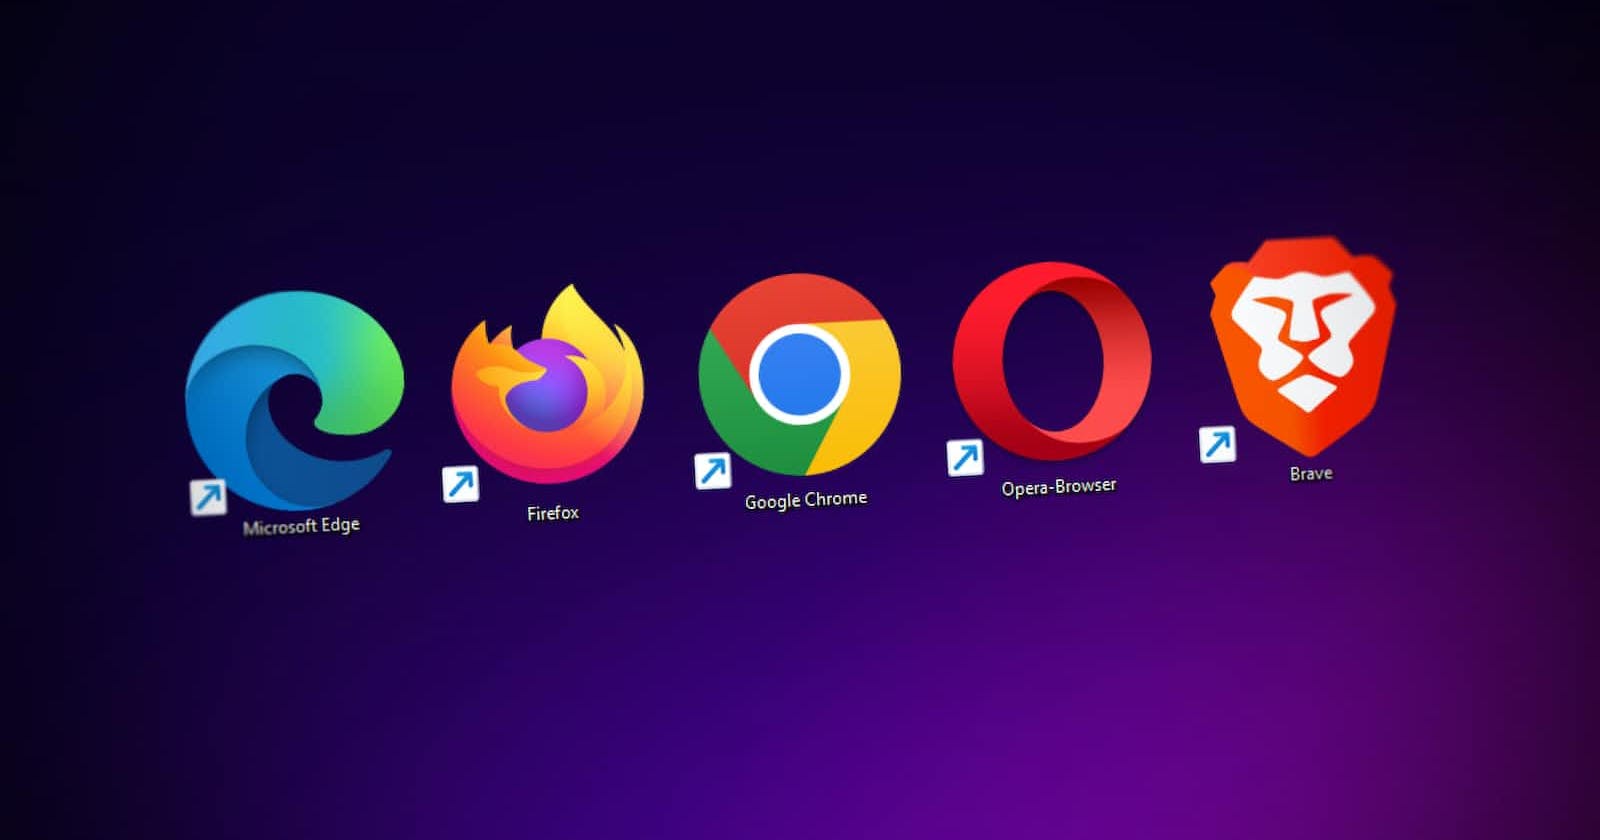 How browser works?